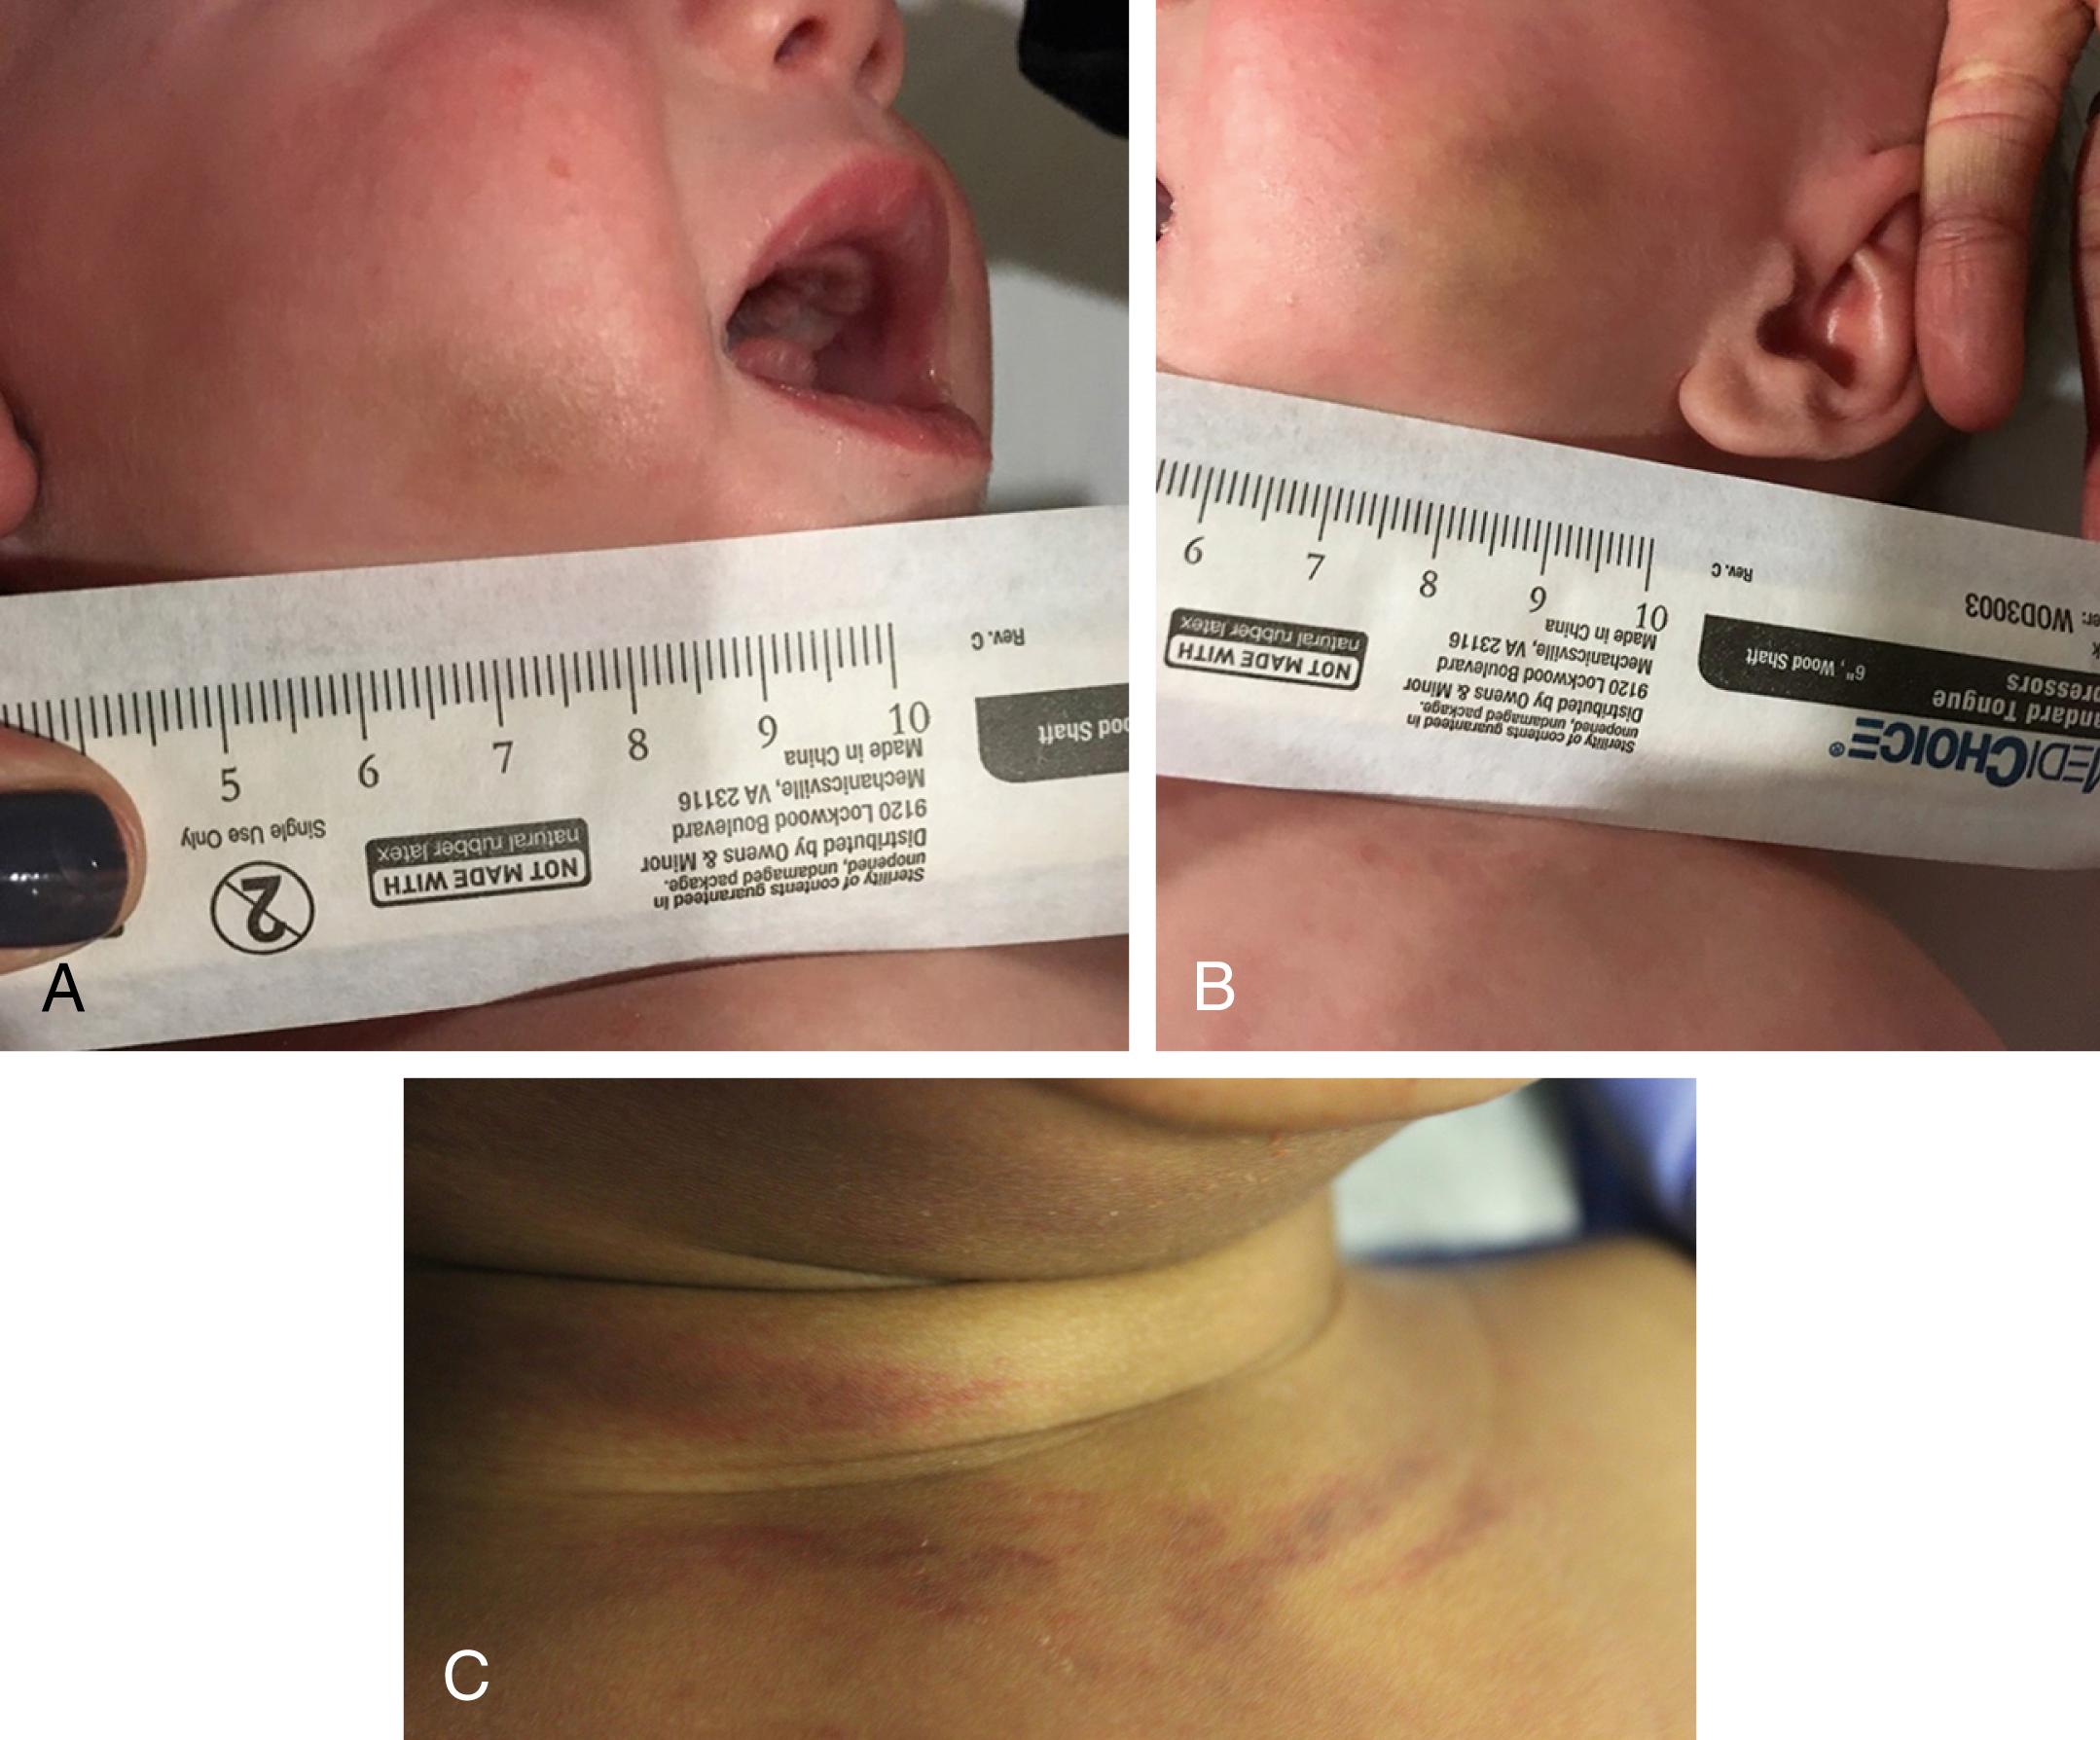 Fig. 6.3, (A) This 8-week-old infant was seen in an emergency department (ED) for respiratory distress, initially attributed to bronchiolitis. The discovery of bilateral cheek bruising prompted a trauma evaluation that revealed numerous classic metaphyseal lesions (CMLs) and a subconjunctival hemorrhage. A septal hematoma was identified as the ultimate cause of her respiratory distress and was drained by otolaryngology (ENT). (B) Bruising to the other cheek. (C) A 9-month-old infant was evaluated by his primary care physician (PCP) for a cough and found to have bruising to his neck and chest. A trauma evaluation found three healing posterior rib fractures and two acute lateral rib fractures.